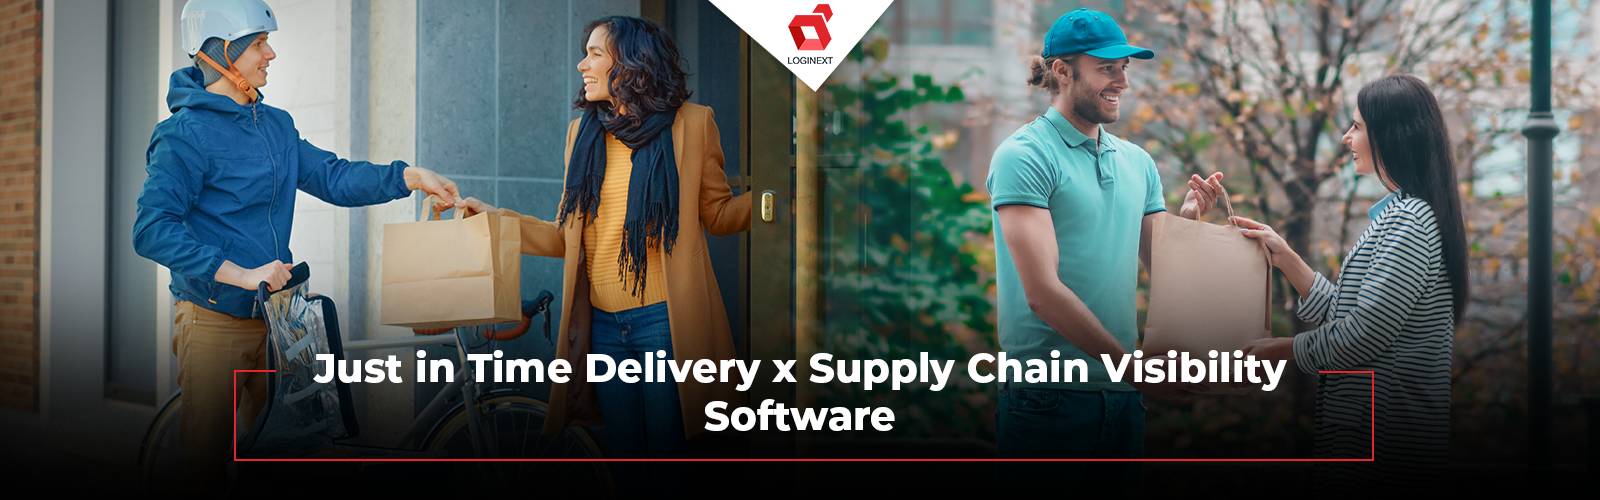 How “Just in Time Delivery” Becomes a Superhero with Supply Chain Visibility Software